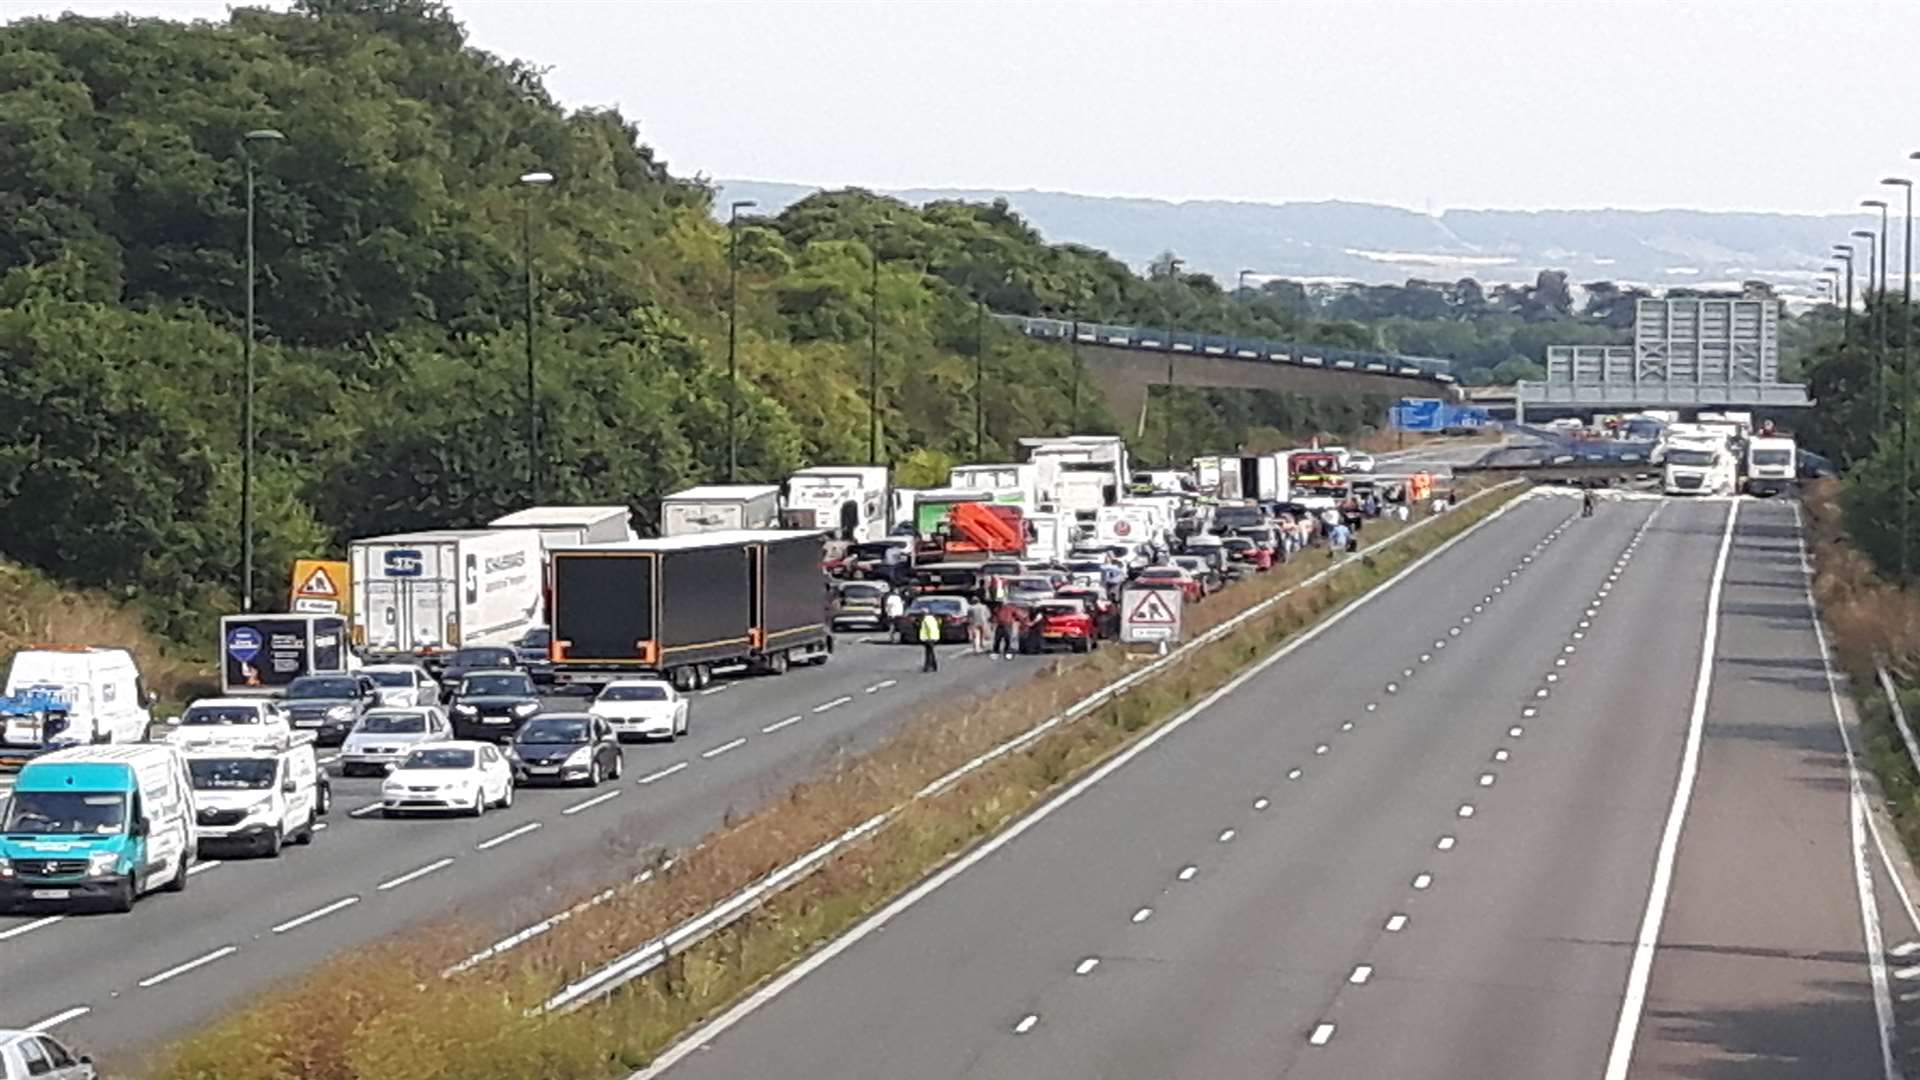 Another view of traffic building up on the M20